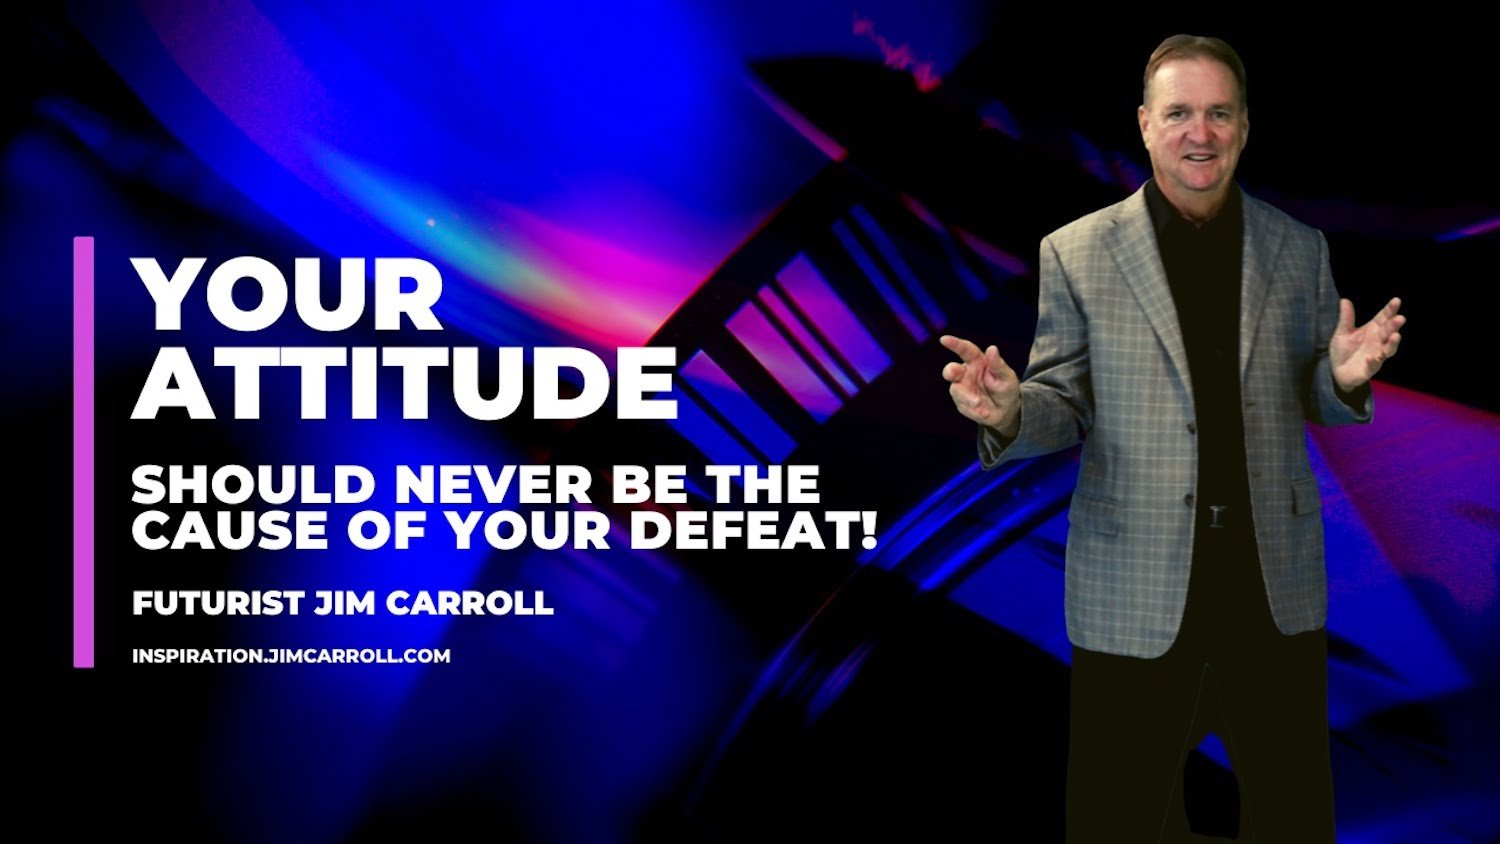 Daily Inspiration: "Your attitude should never be the cause of your defeat!"